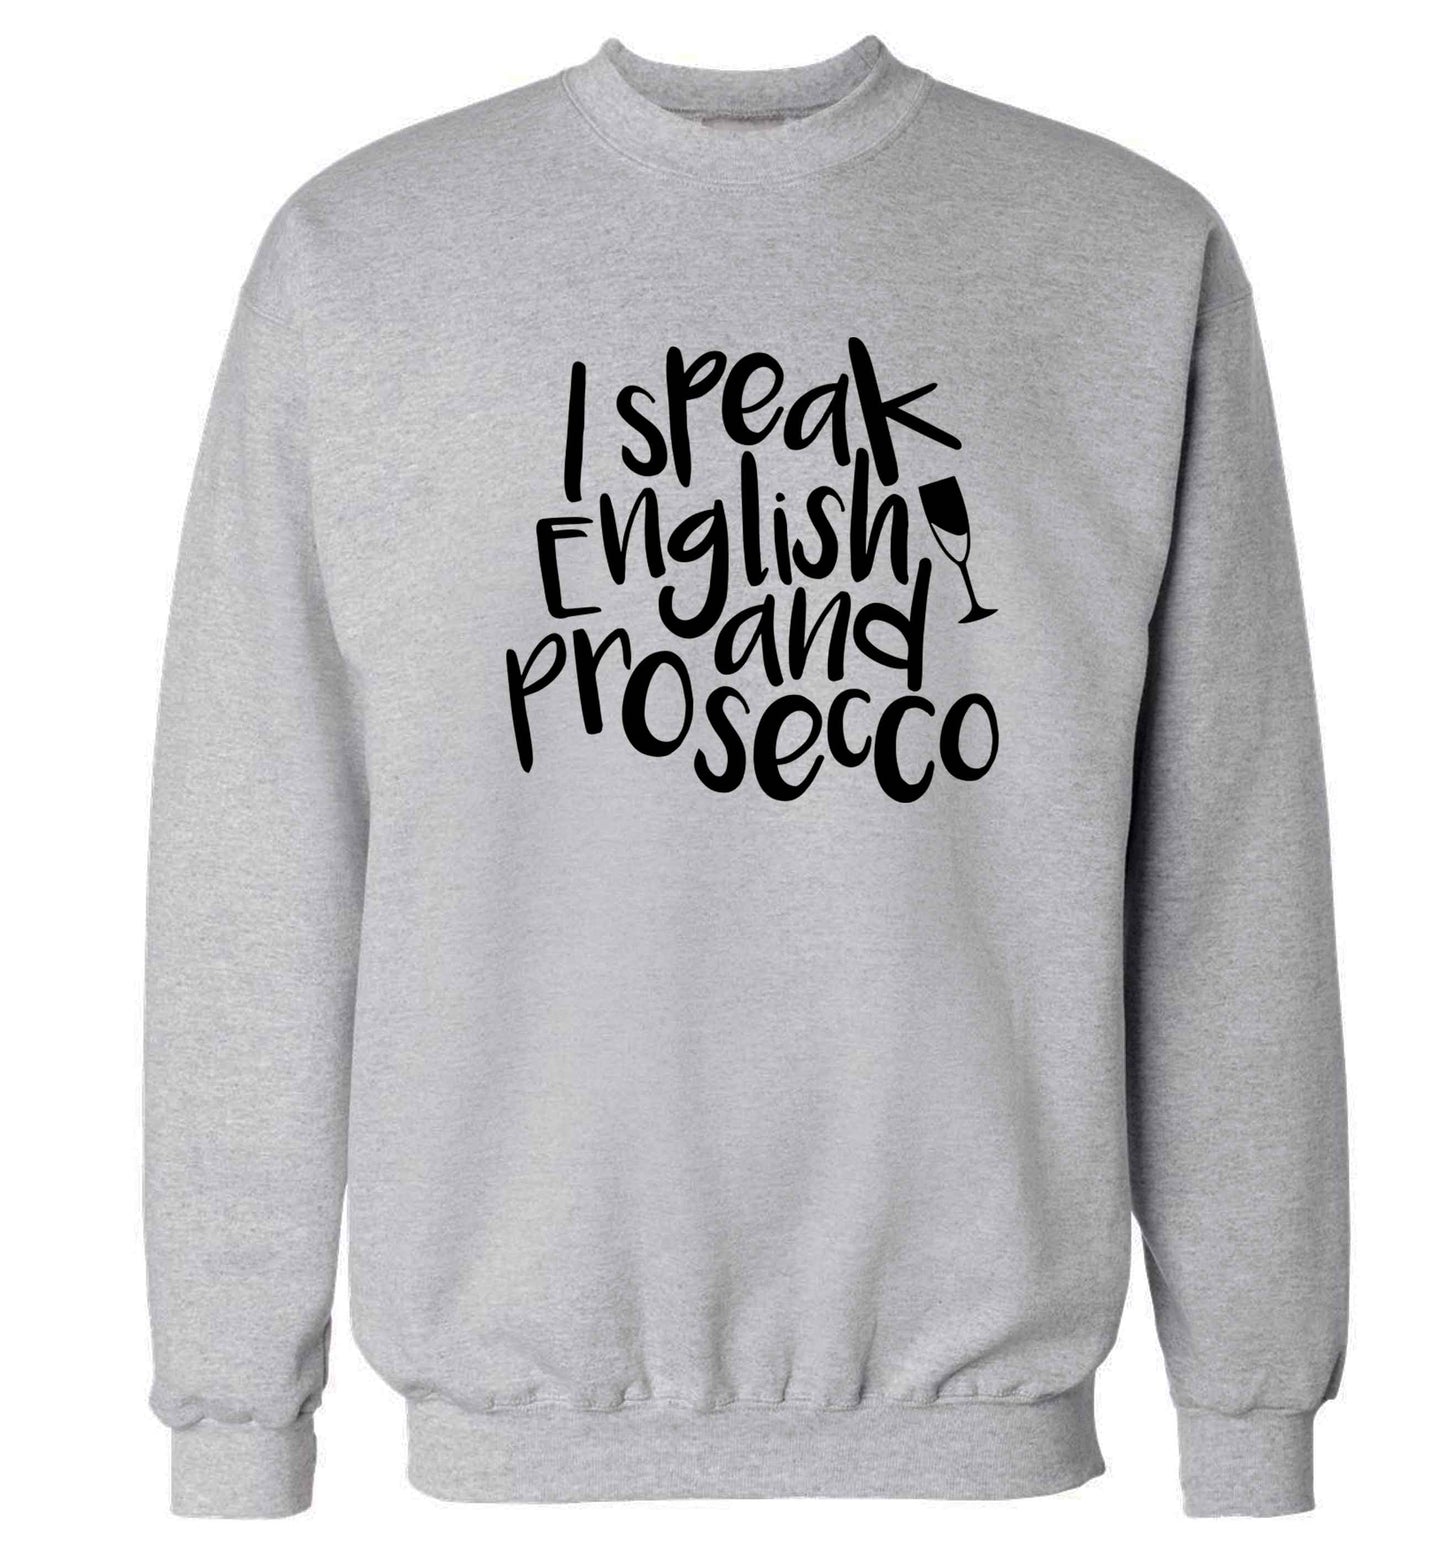 I speak English and prosecco Adult's unisex grey Sweater 2XL